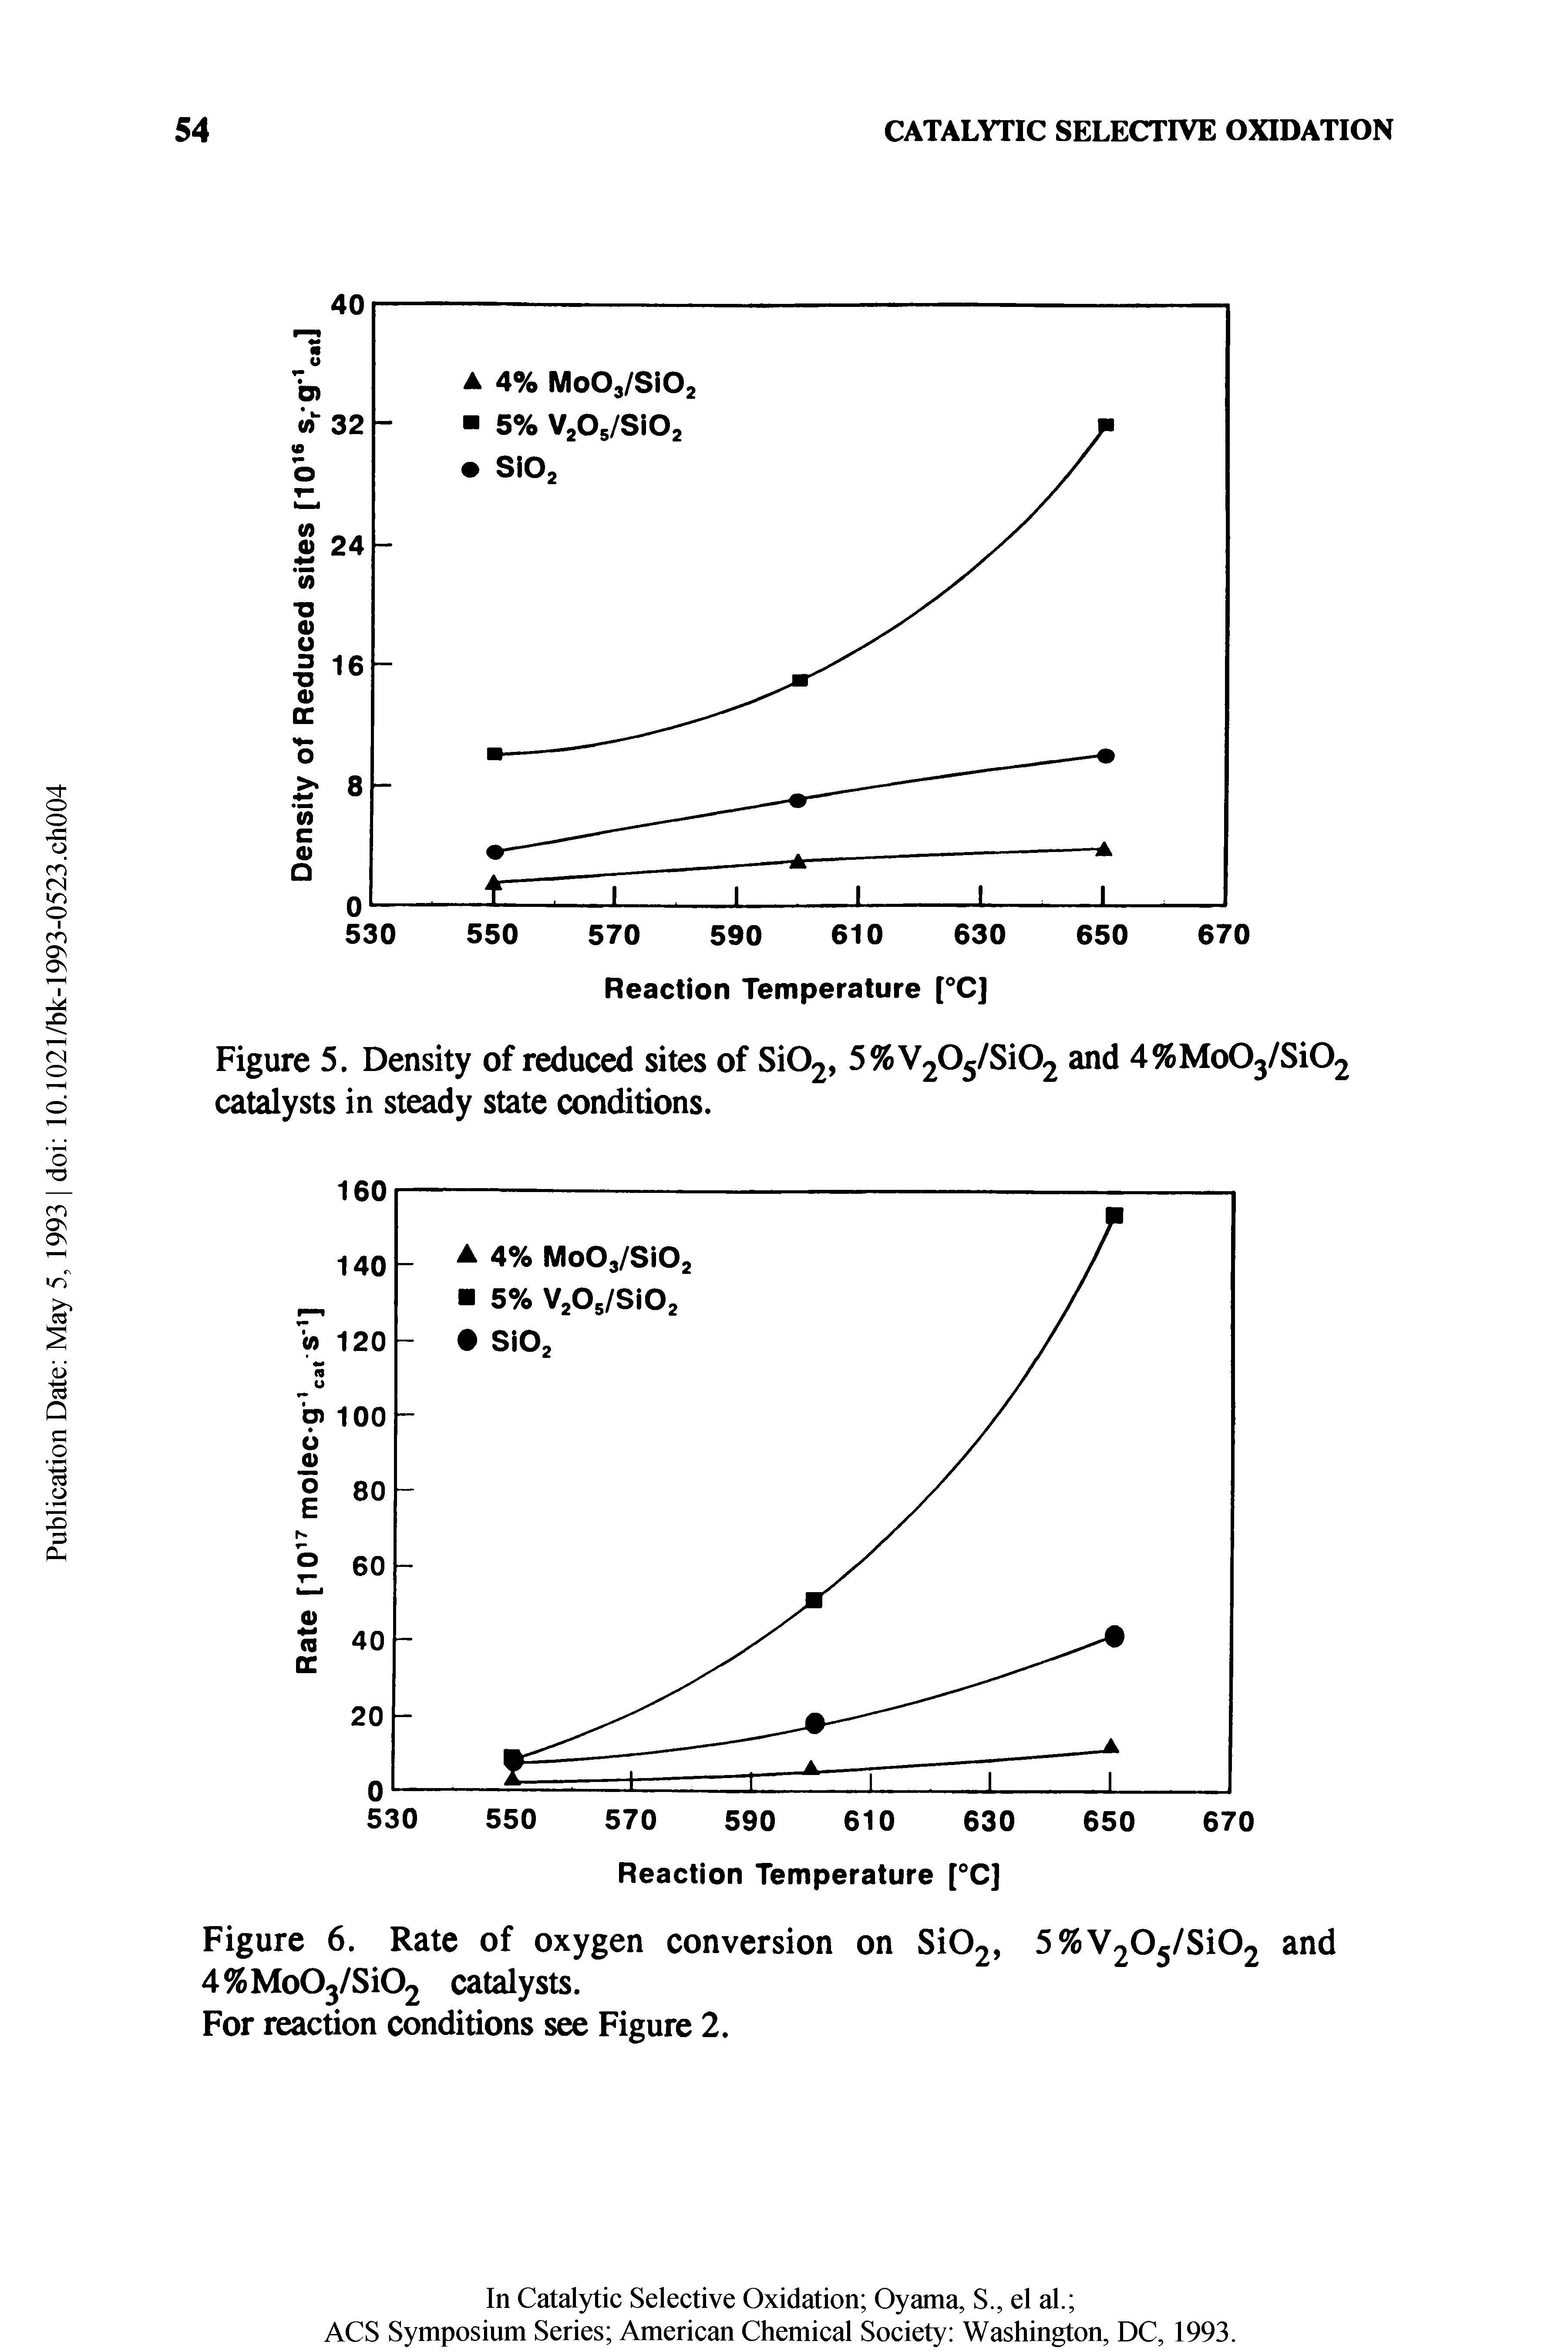 Figure 6. Rate of oxygen conversion on Si02, 5%V205/Si02 and 4%Mo03/Si02 catalysts.